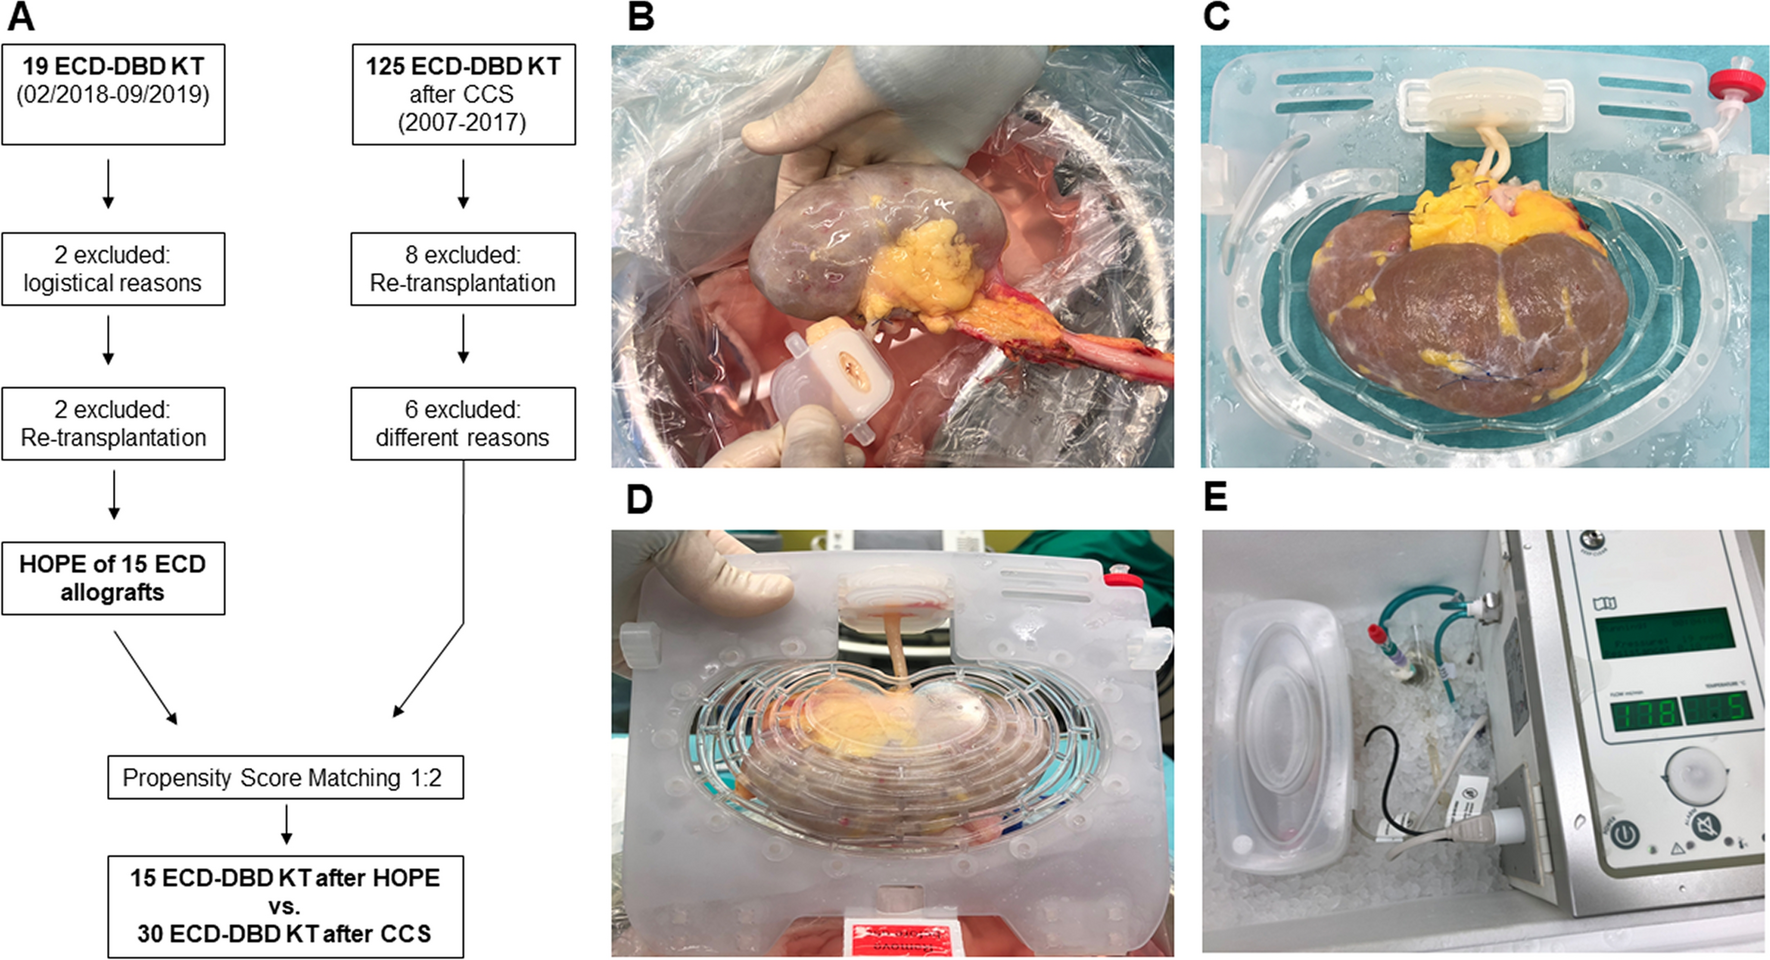 Decrease of renal resistance during hypothermic oxygenated machine  perfusion is associated with early allograft function in extended criteria  donation kidney transplantation | Scientific Reports